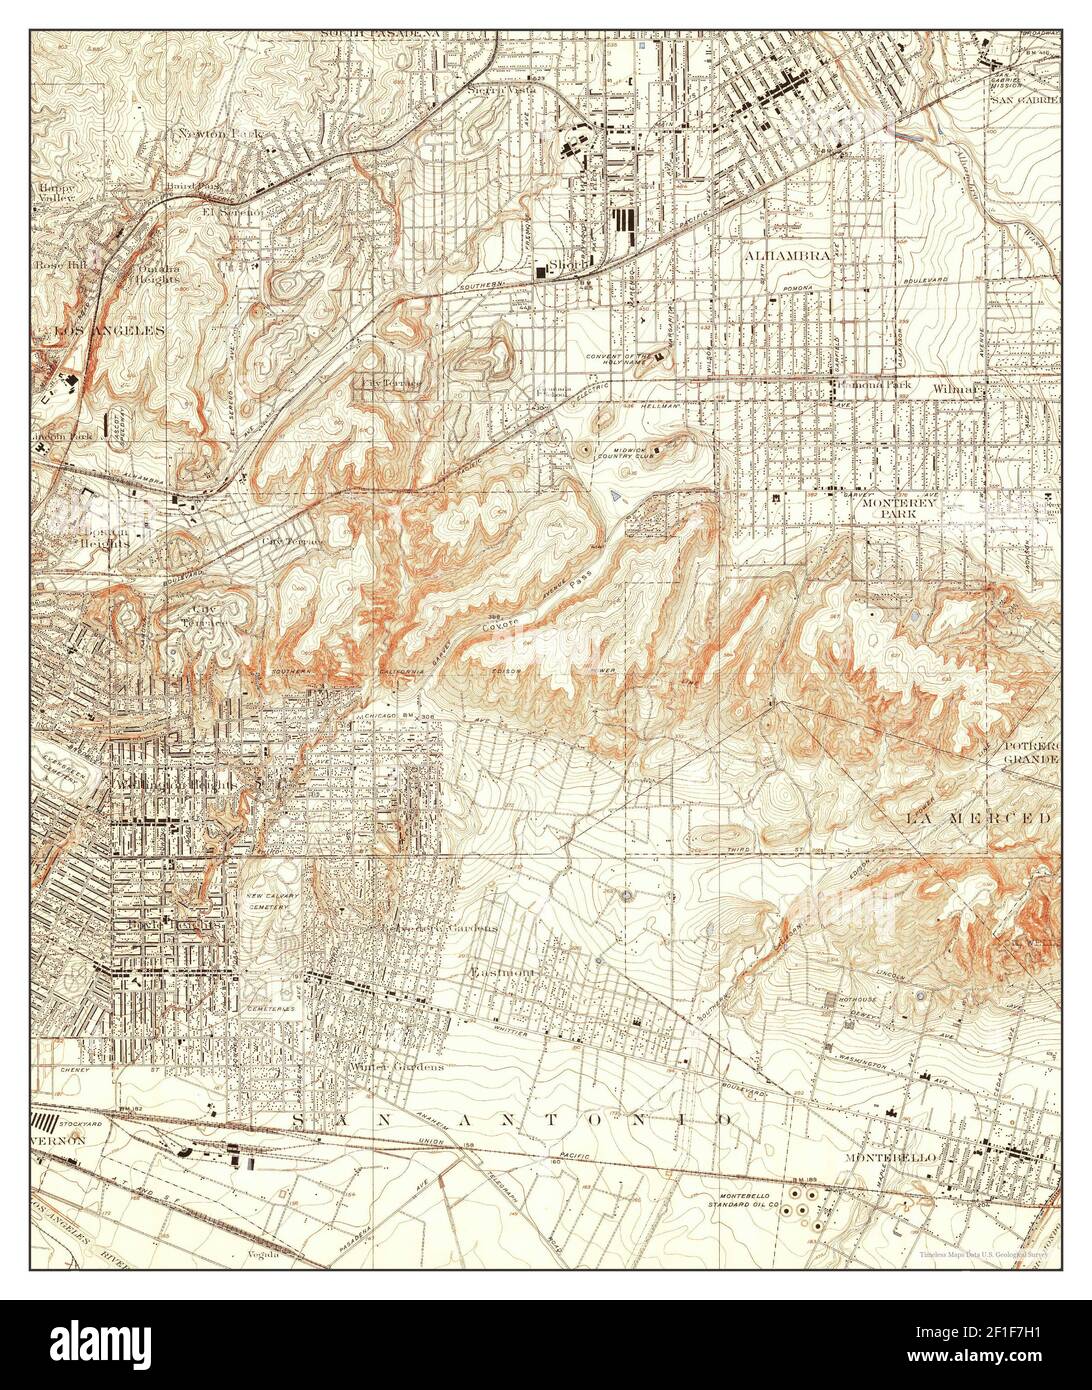 Alhambra, California, map 1926, 1:24000, United States of America by ...